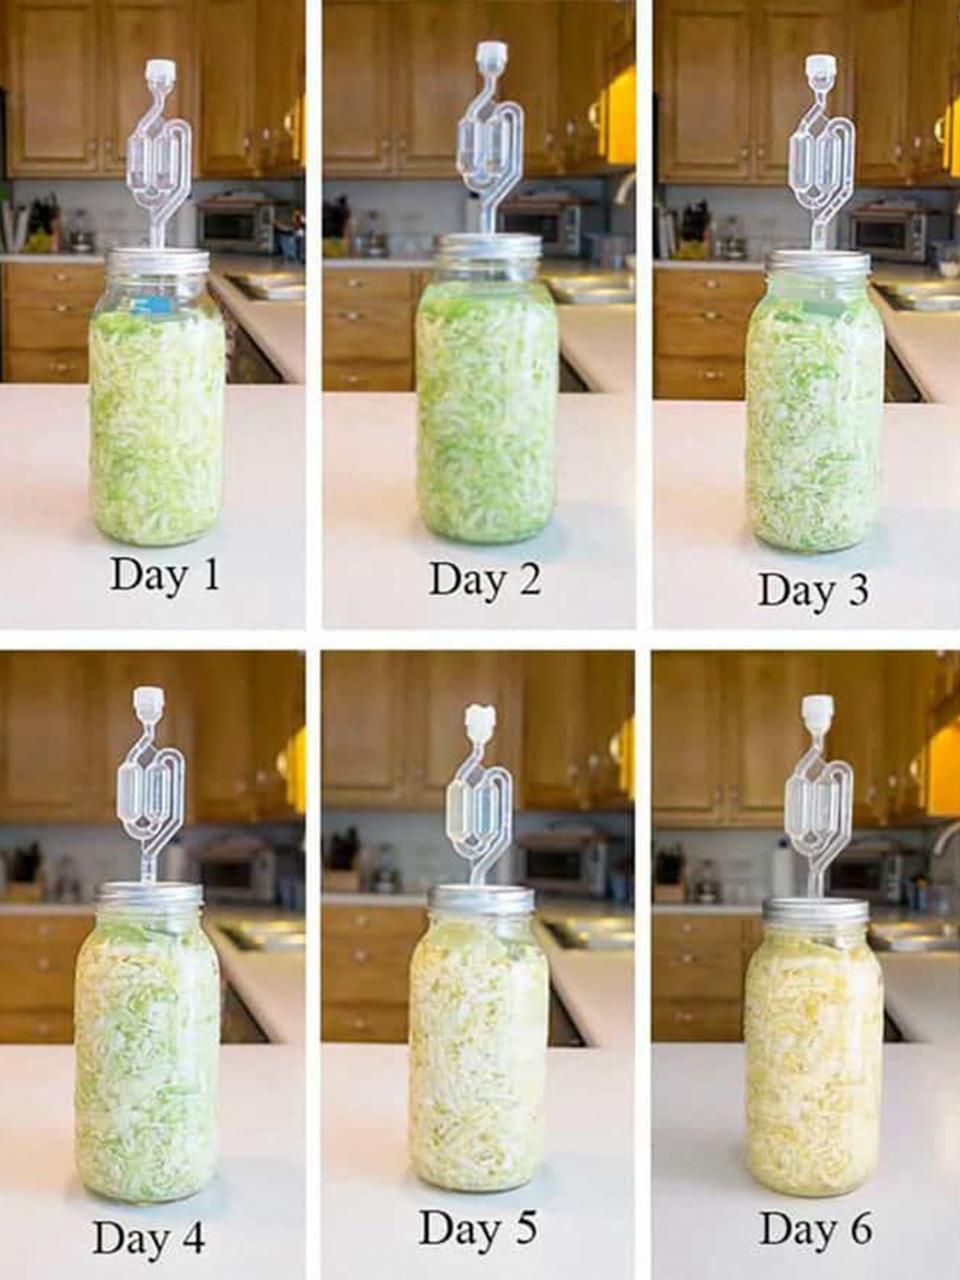 The sauerkraut fermentation is most visibly active during the first six or seven days where the cabbage turns from green to a light-beige color.